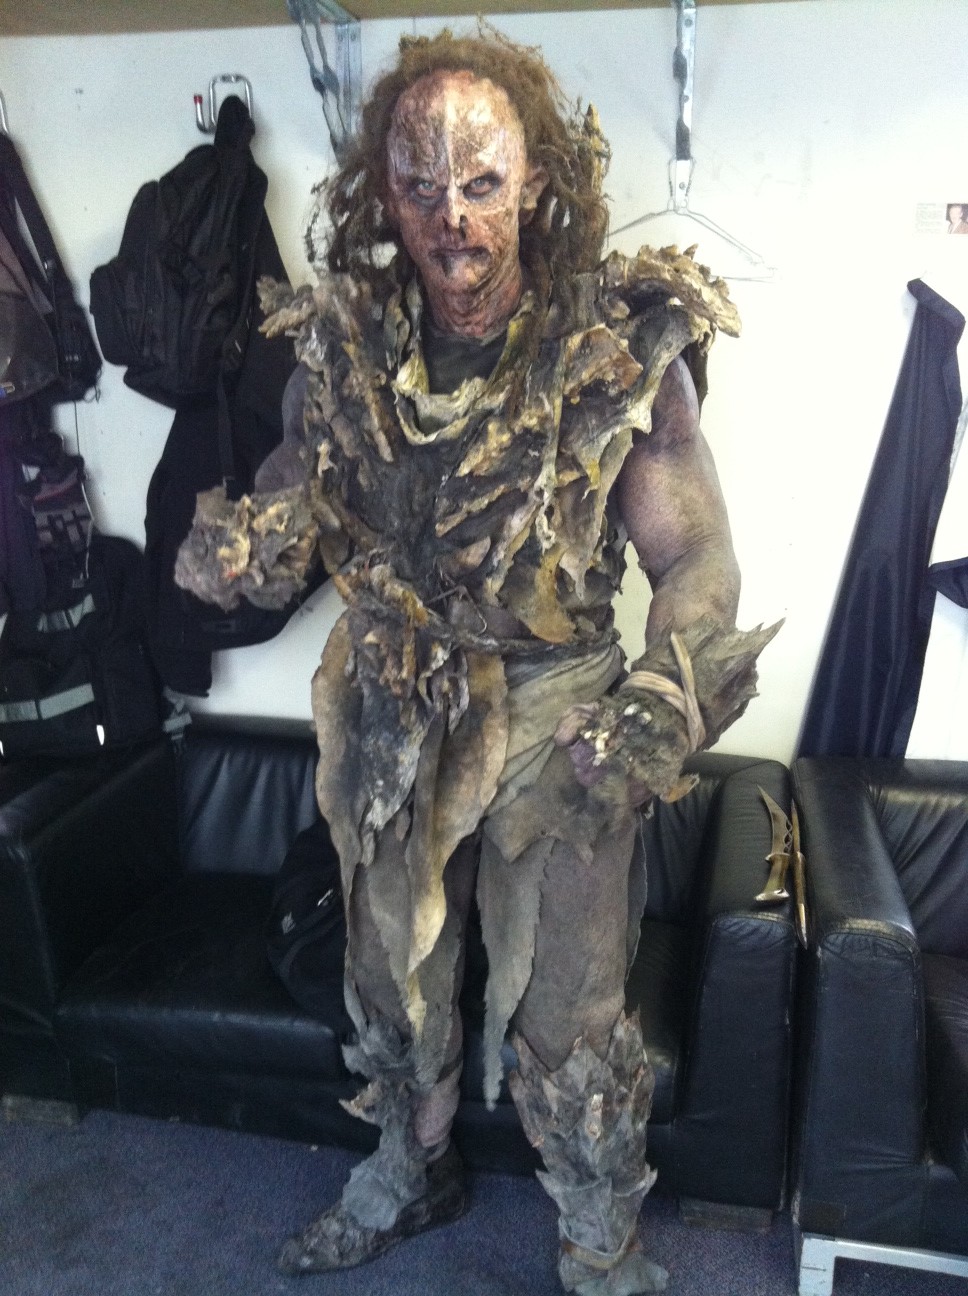 Full face prosthetics as an Orc on The Hobbit